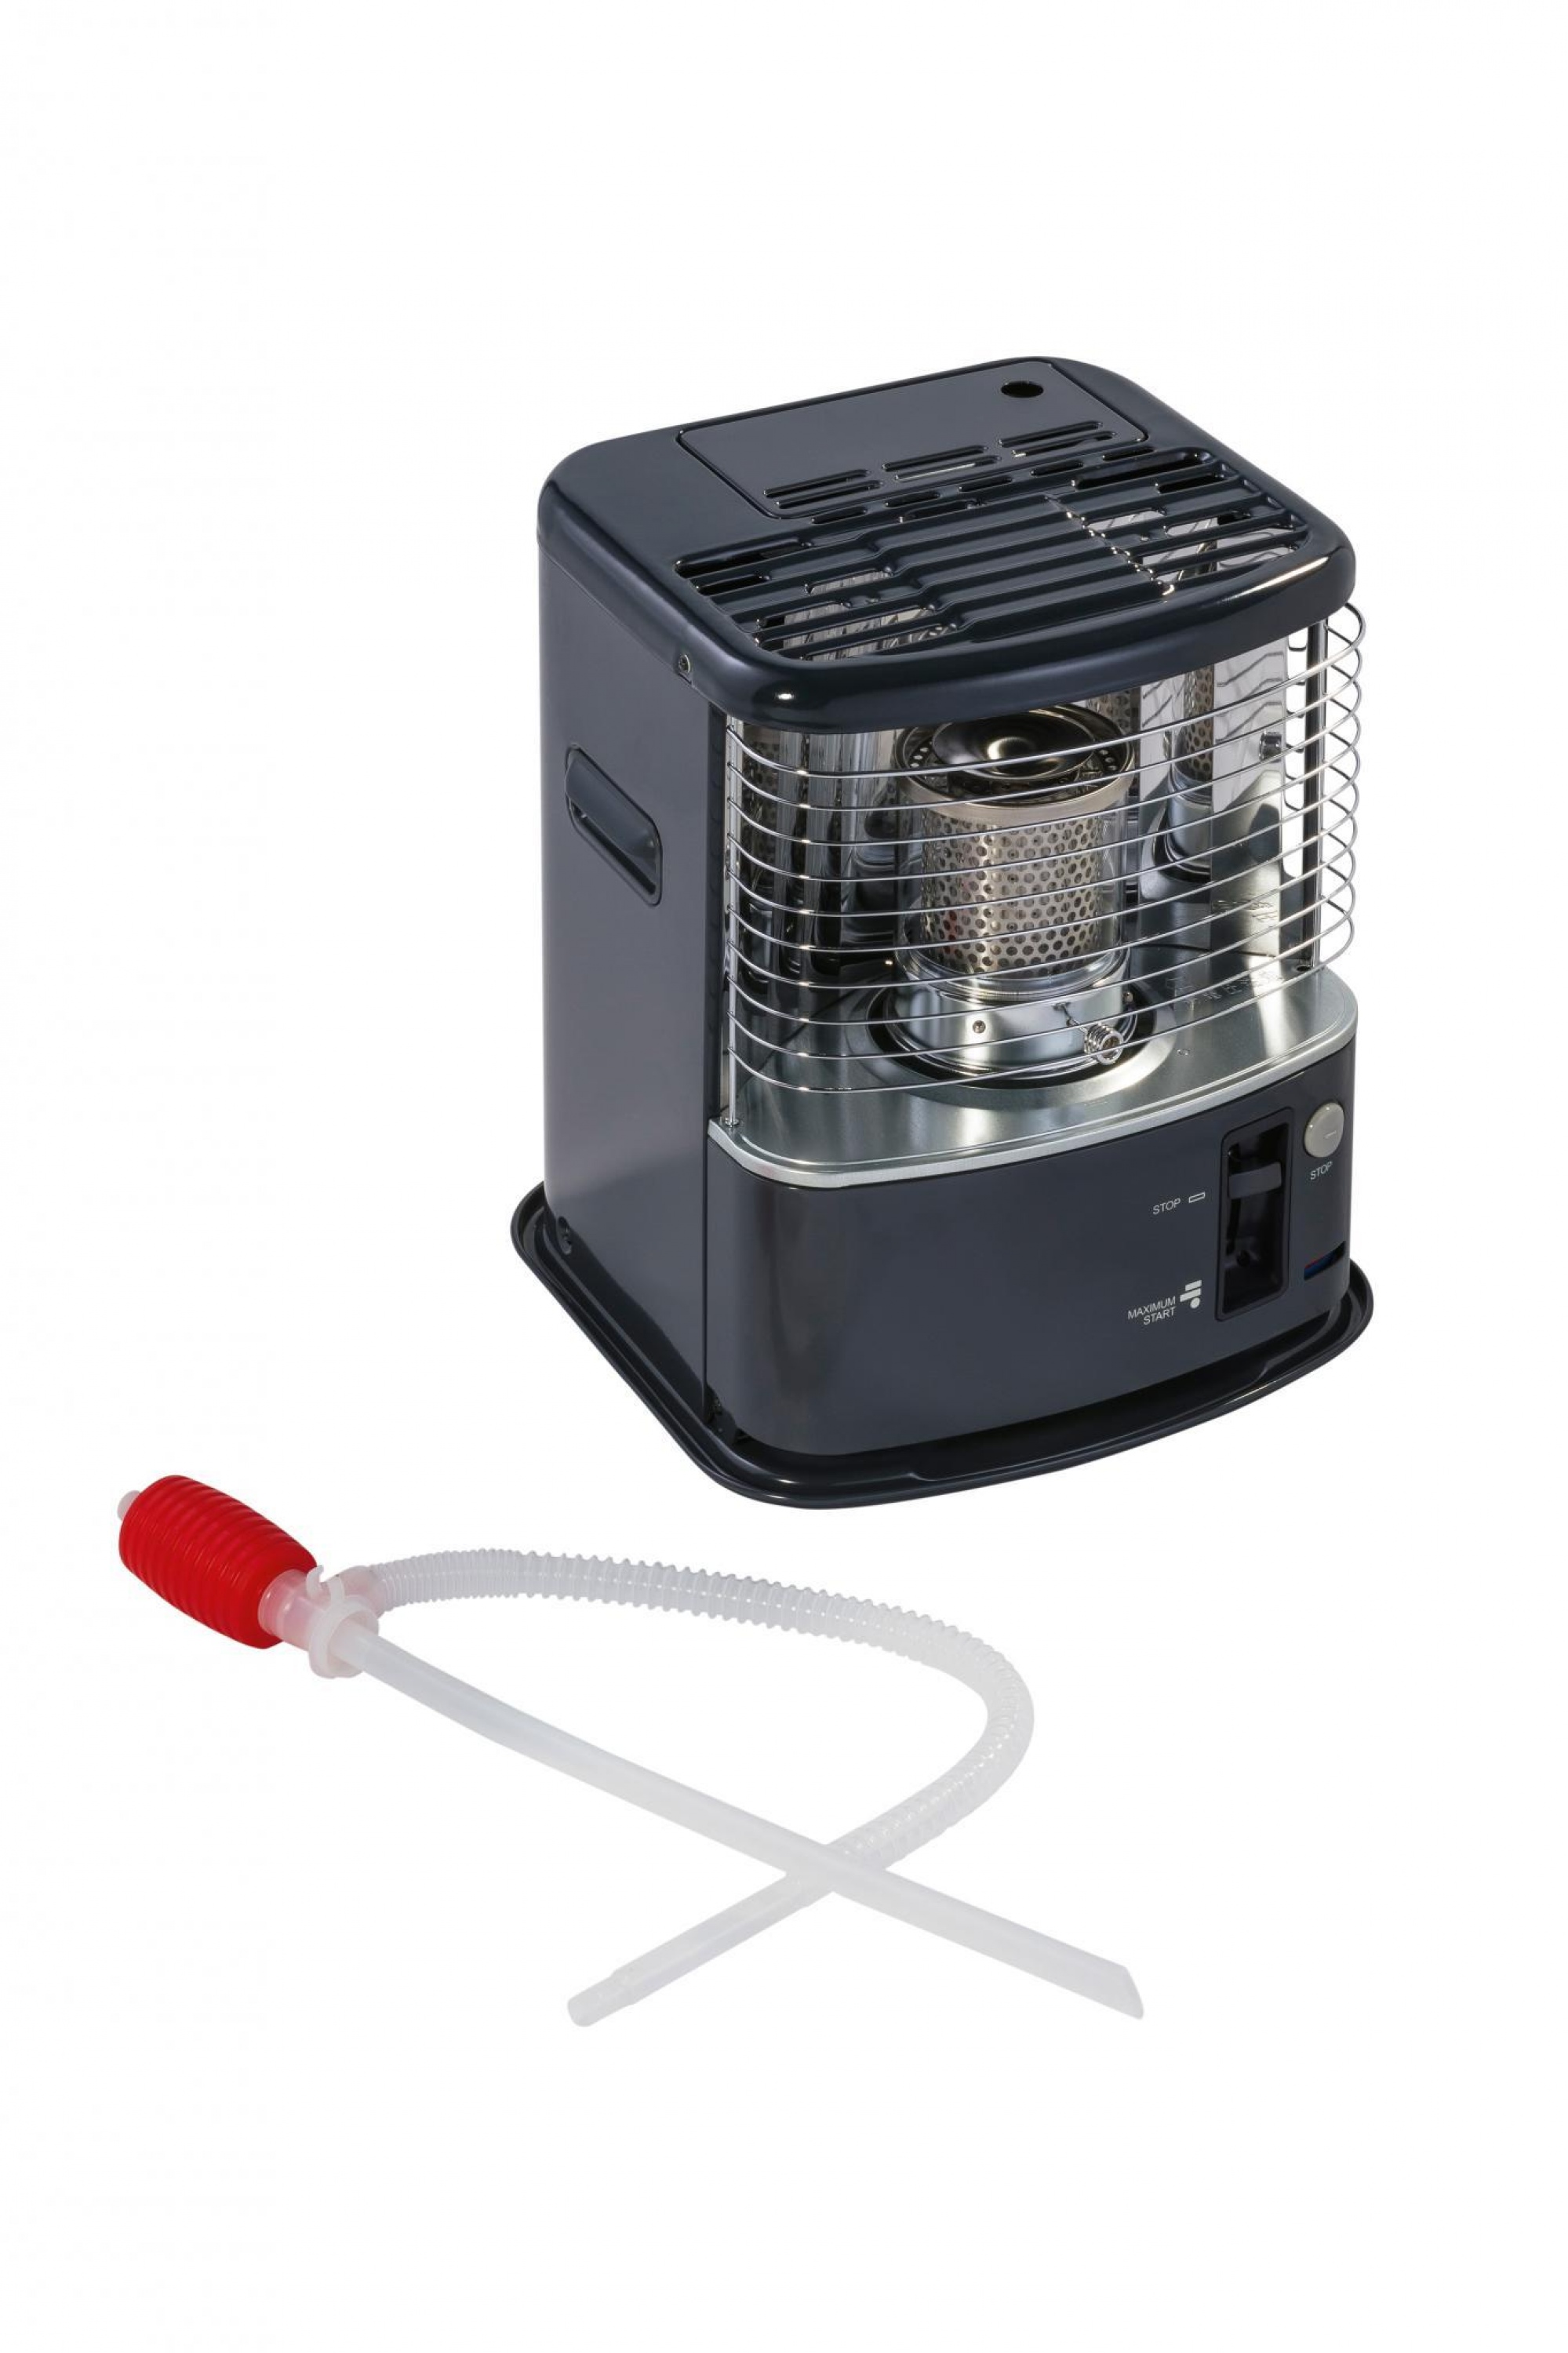 The portable kerosene stove can be used anywhere, thanks to its new desing  and exclusive finishes. This stove offers the efficiency of dual combustion  - Ferrino